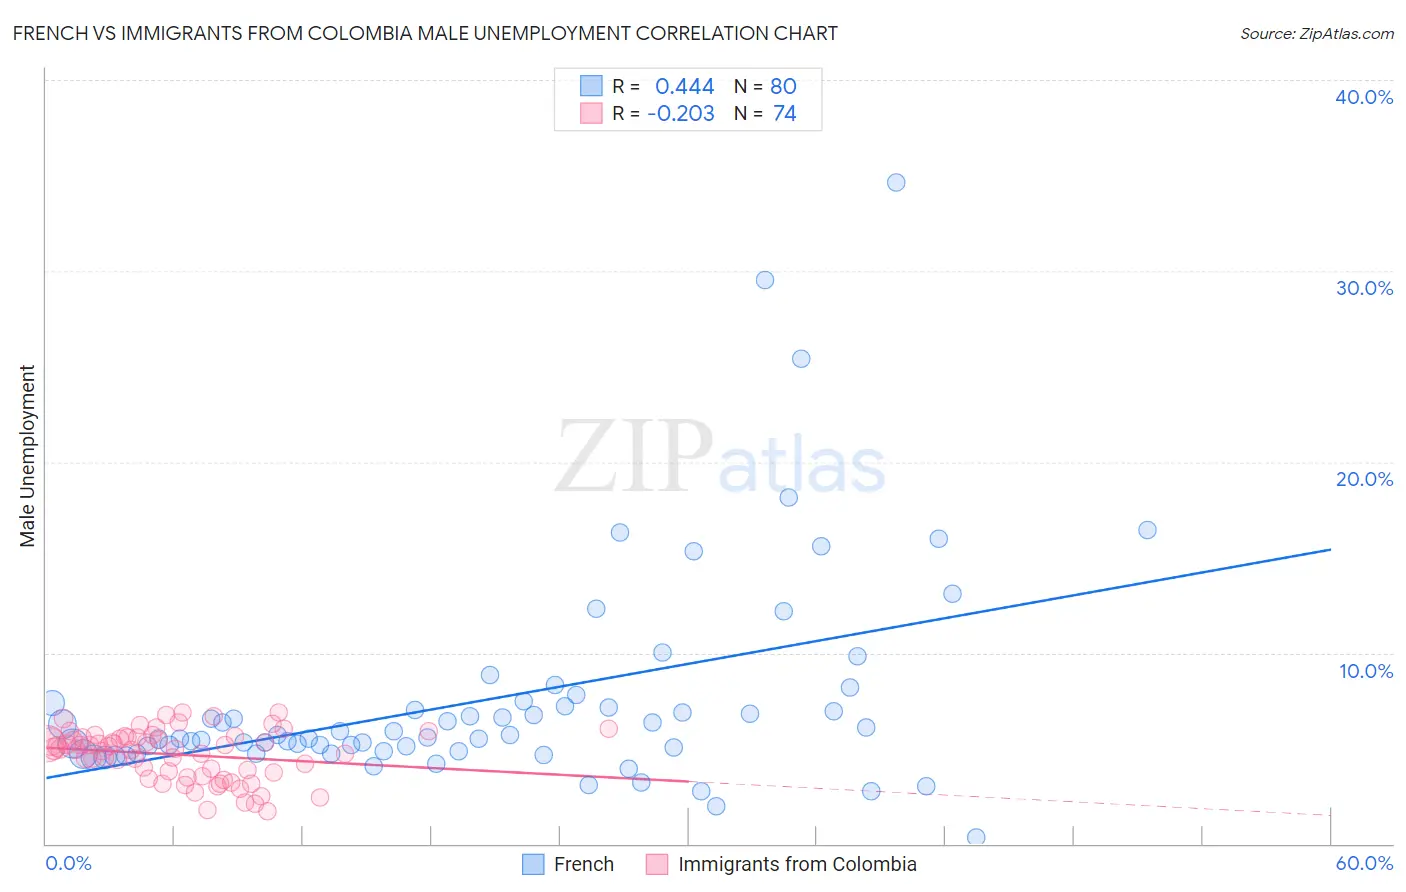 French vs Immigrants from Colombia Male Unemployment